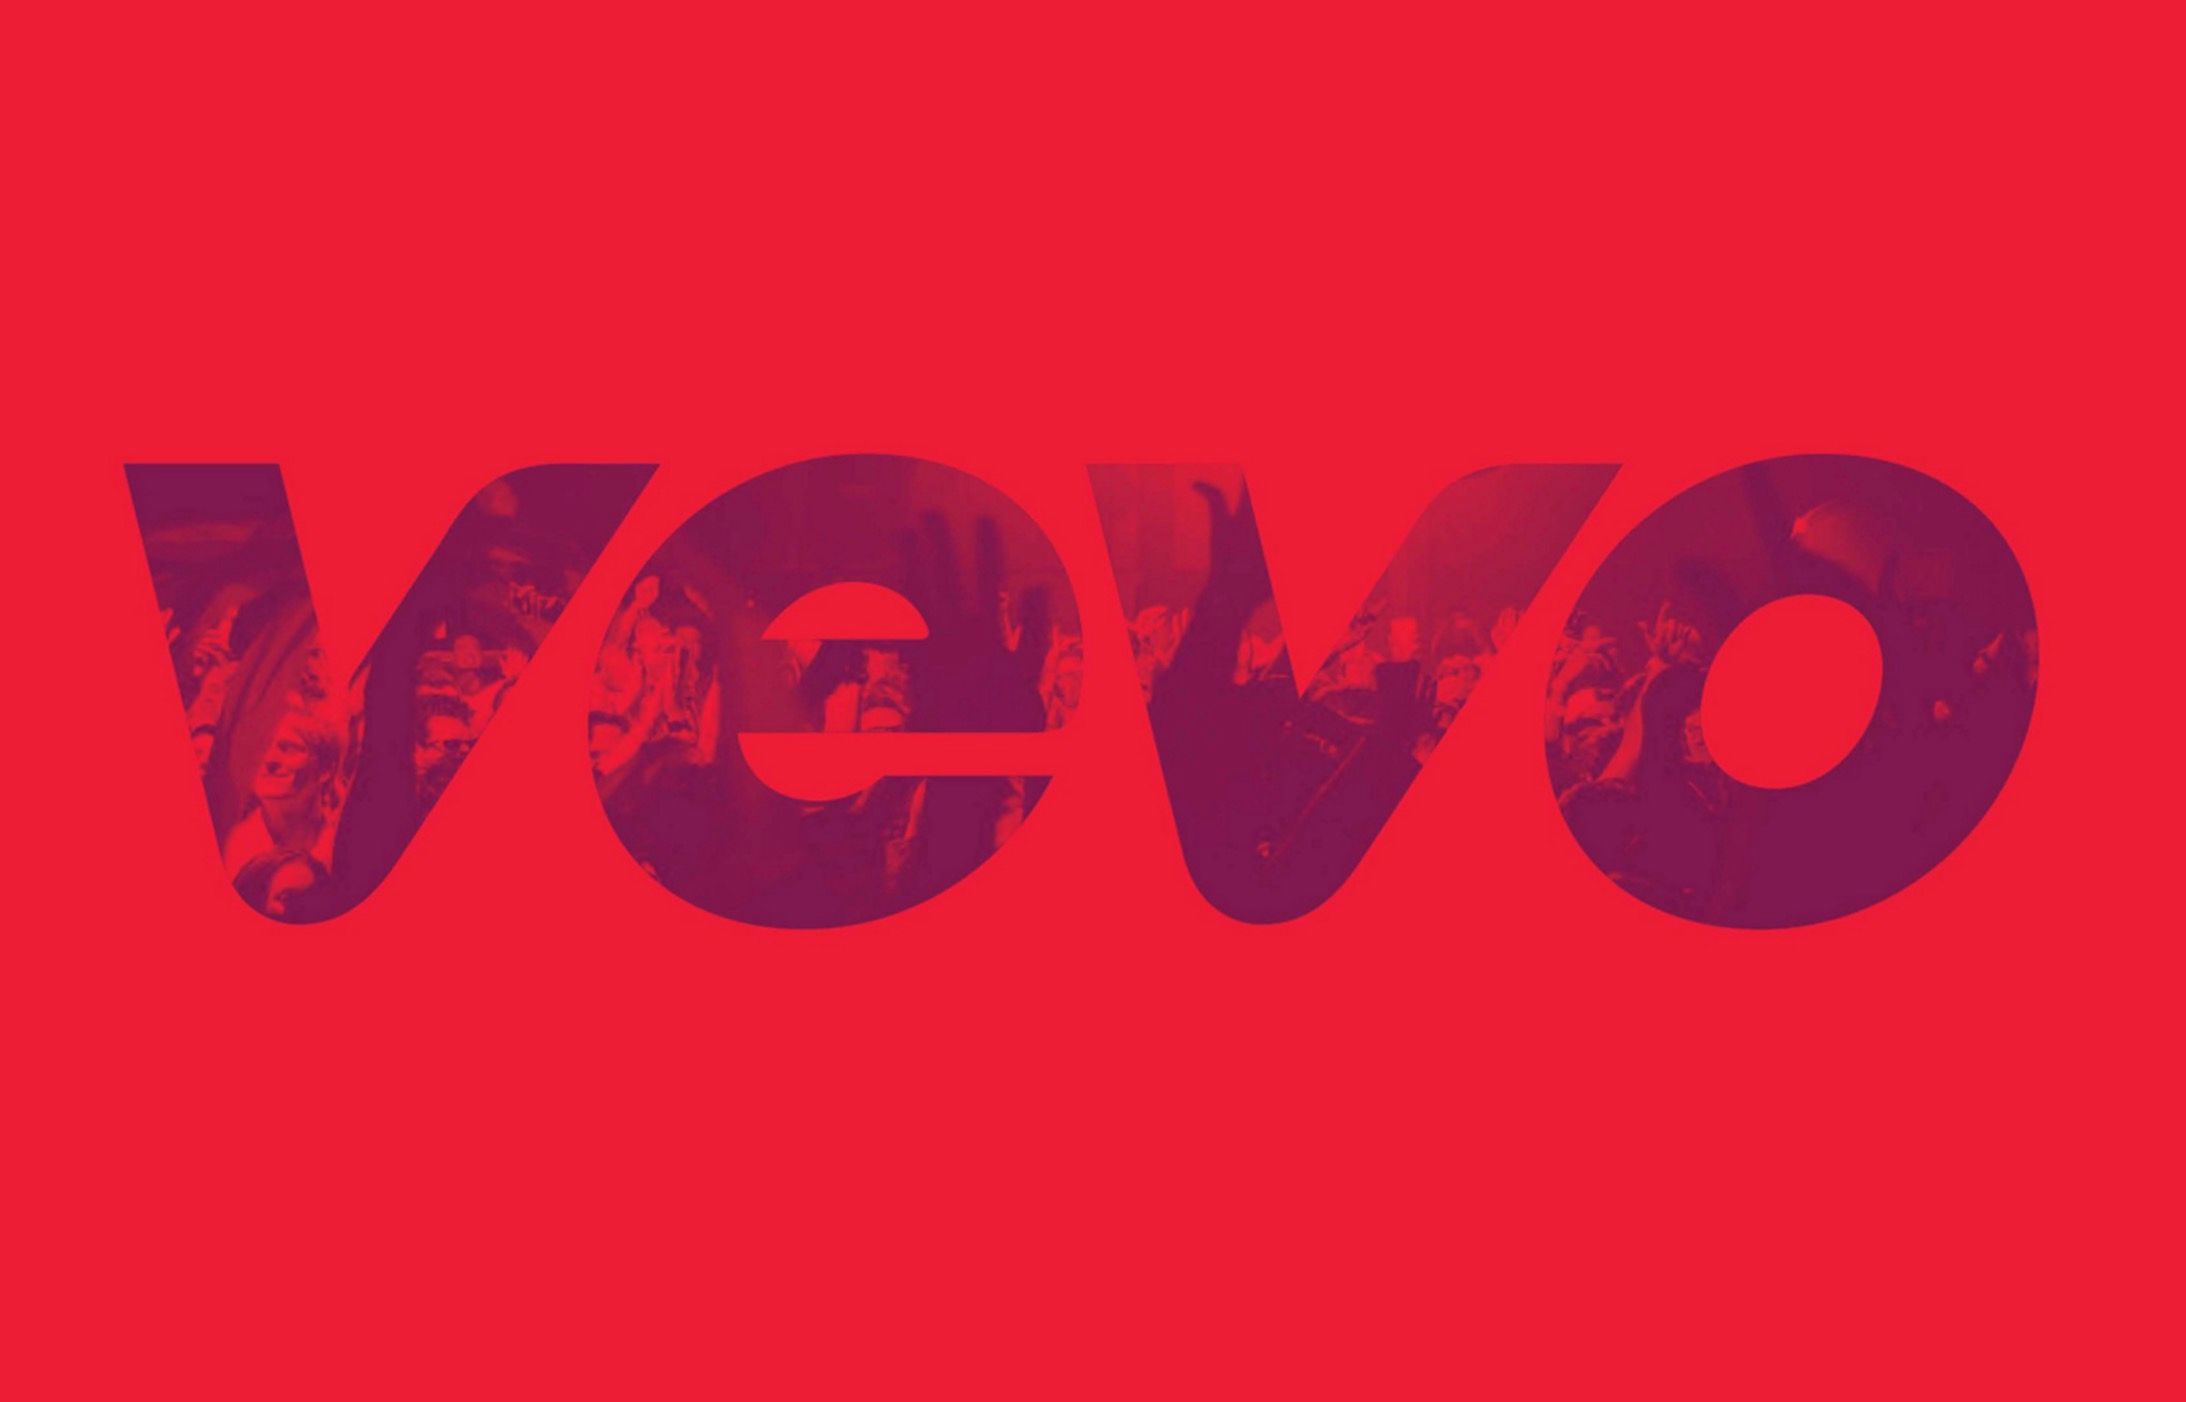 Vevo is planning a paid subscription service for ad-free music videos